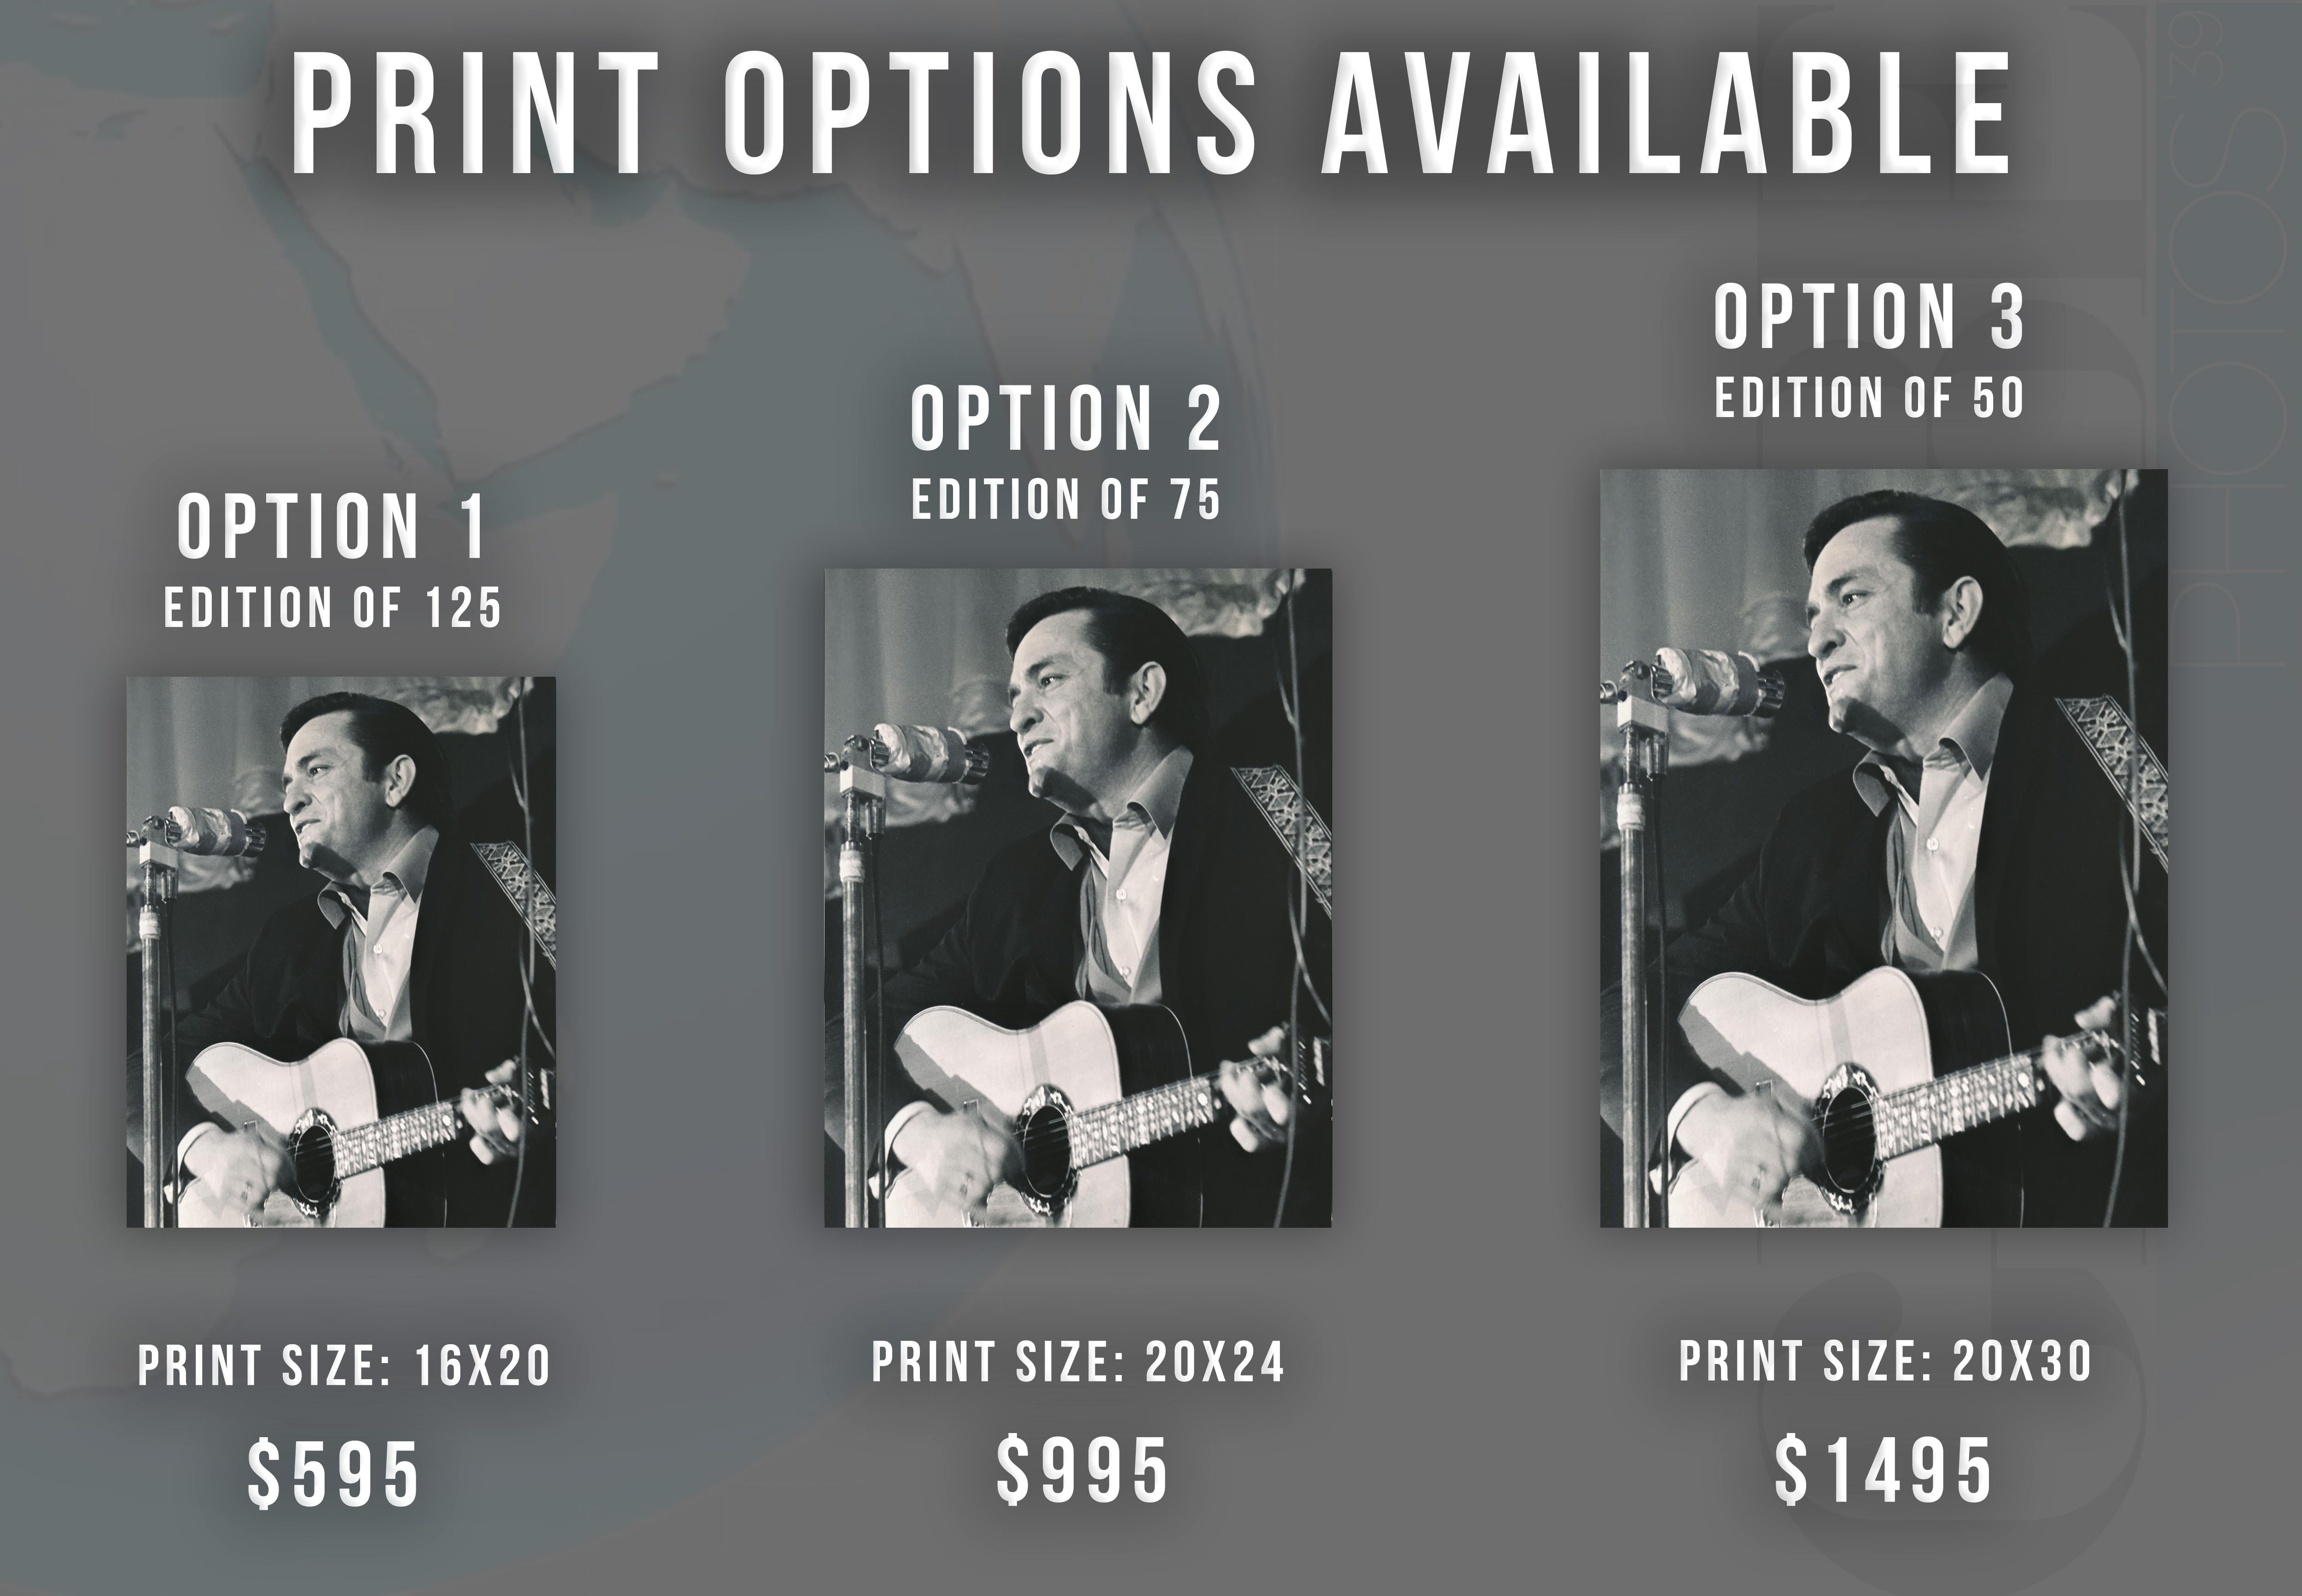 Johnny Cash Performing on Stage Fine Art Print - Photograph by J.T. Phillips